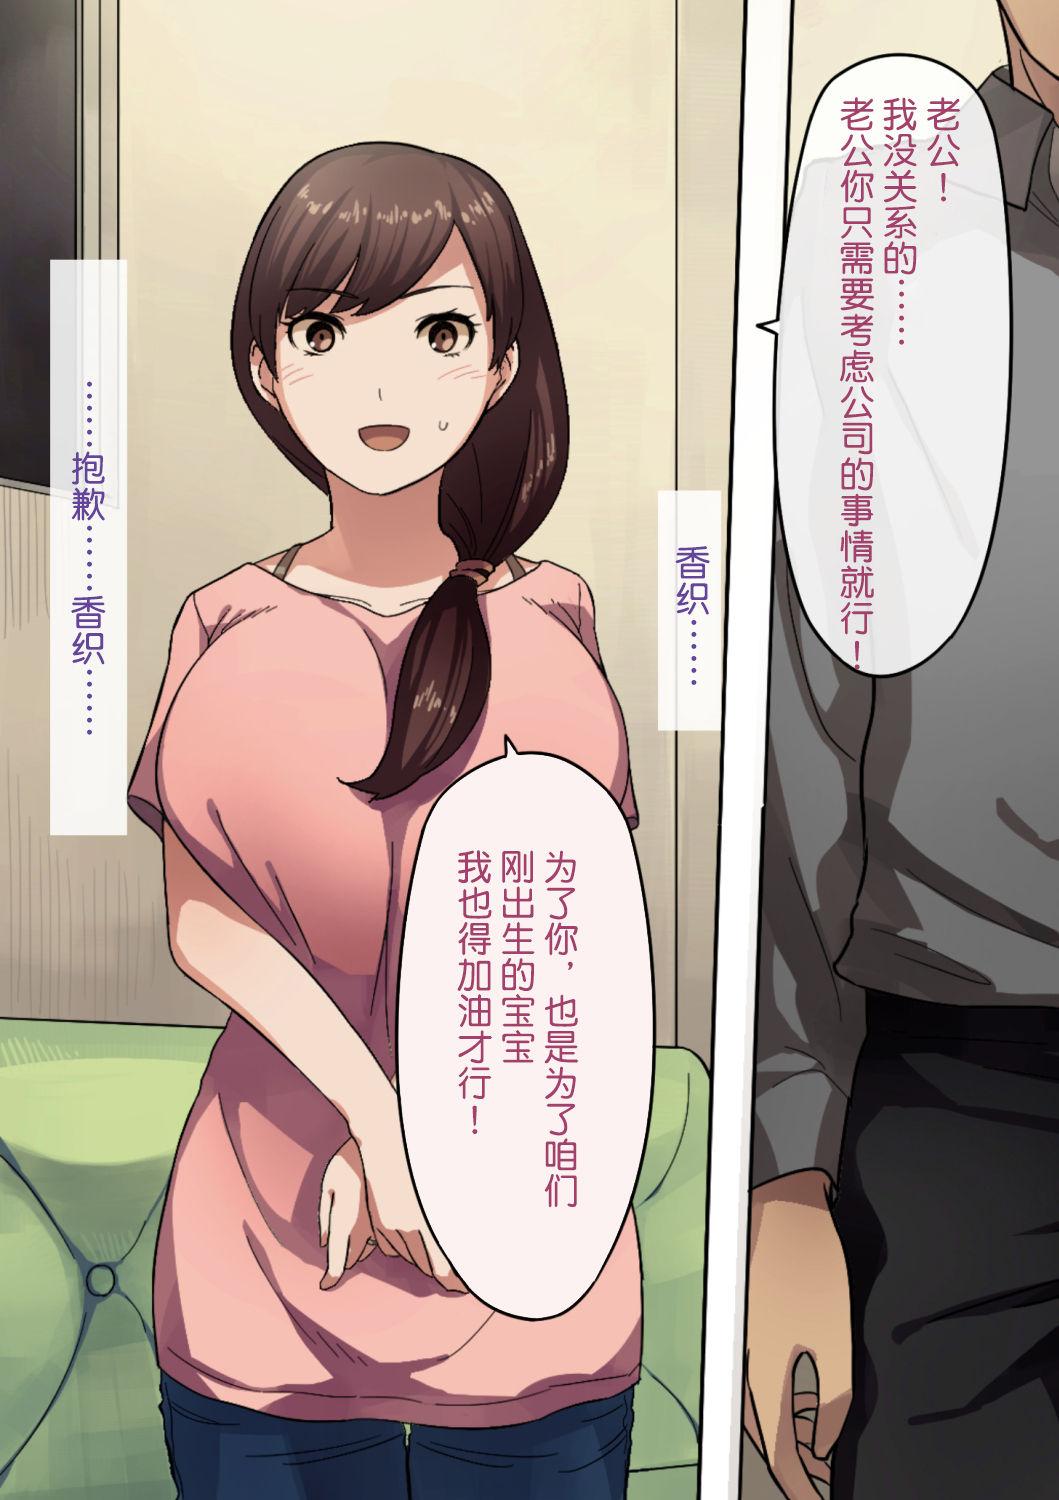 Panty [NT Labo] Aisai, Doui no Ue, Netorare | Beloved Wife - Netorare After Consent[Chinese]【不可视汉化】 Fisting - Page 5